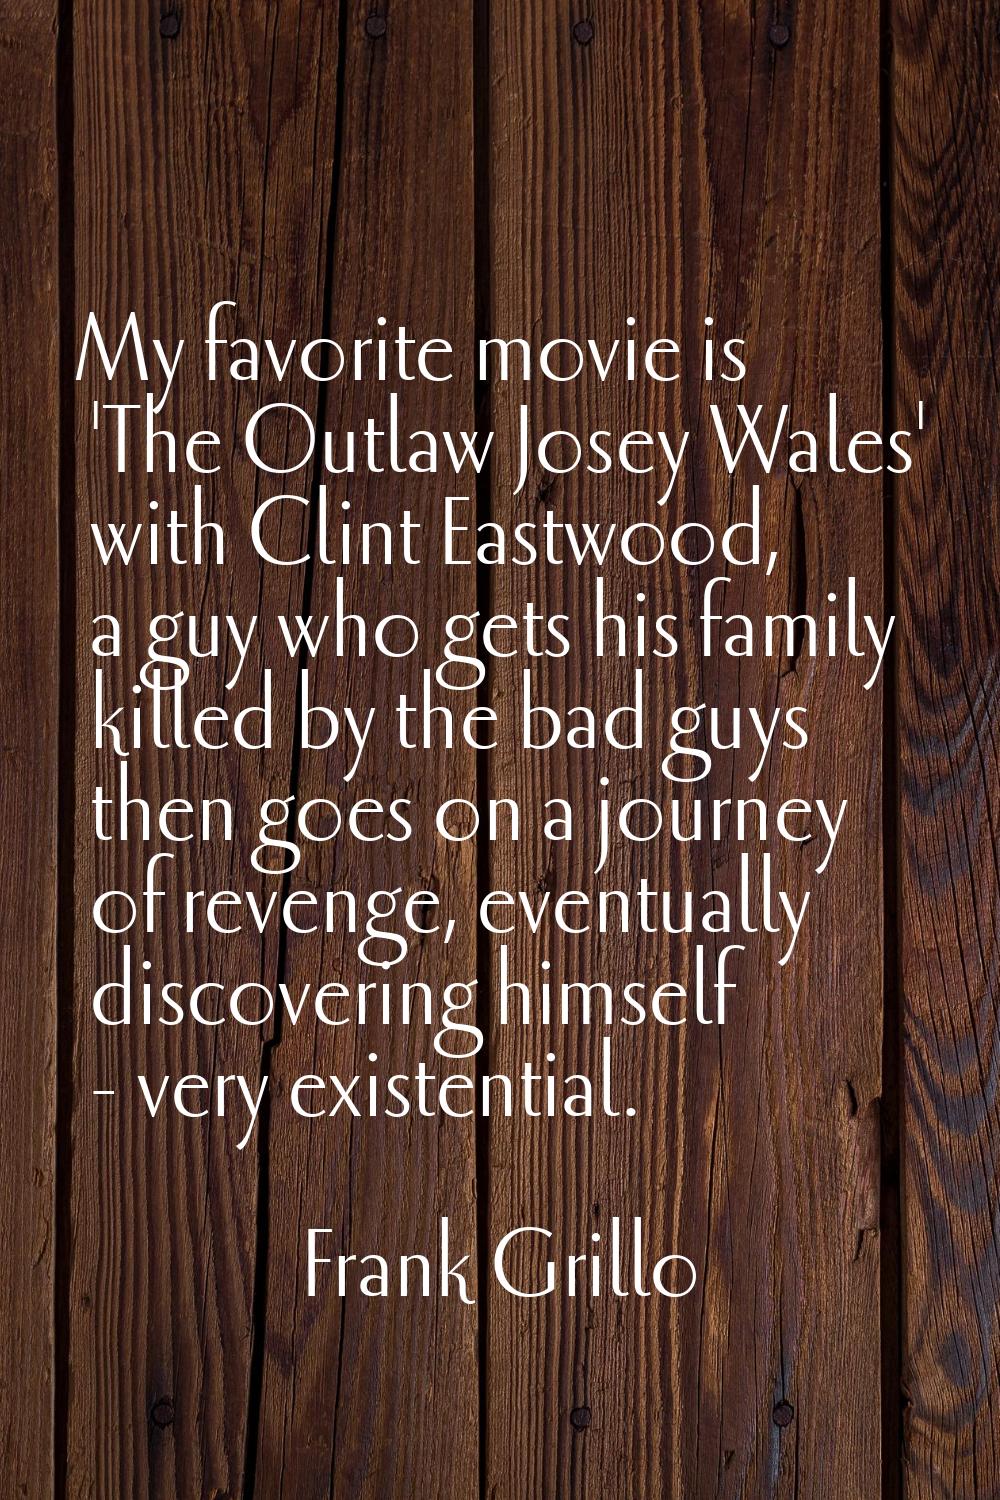 My favorite movie is 'The Outlaw Josey Wales' with Clint Eastwood, a guy who gets his family killed